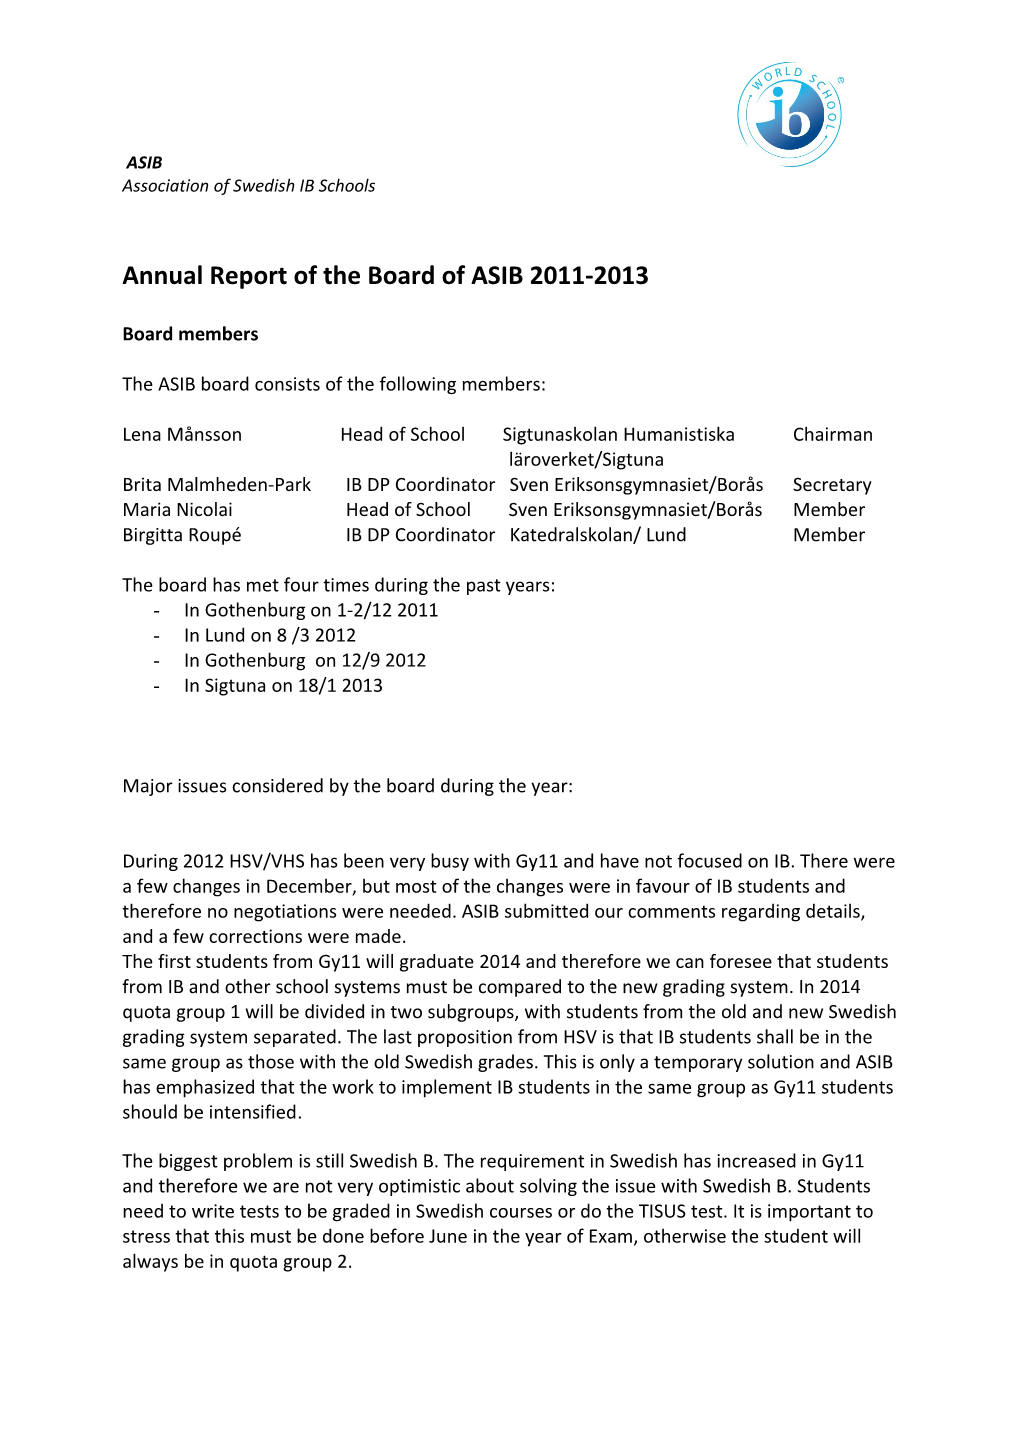 Annual Report of the Board of ASIB 2009-2010